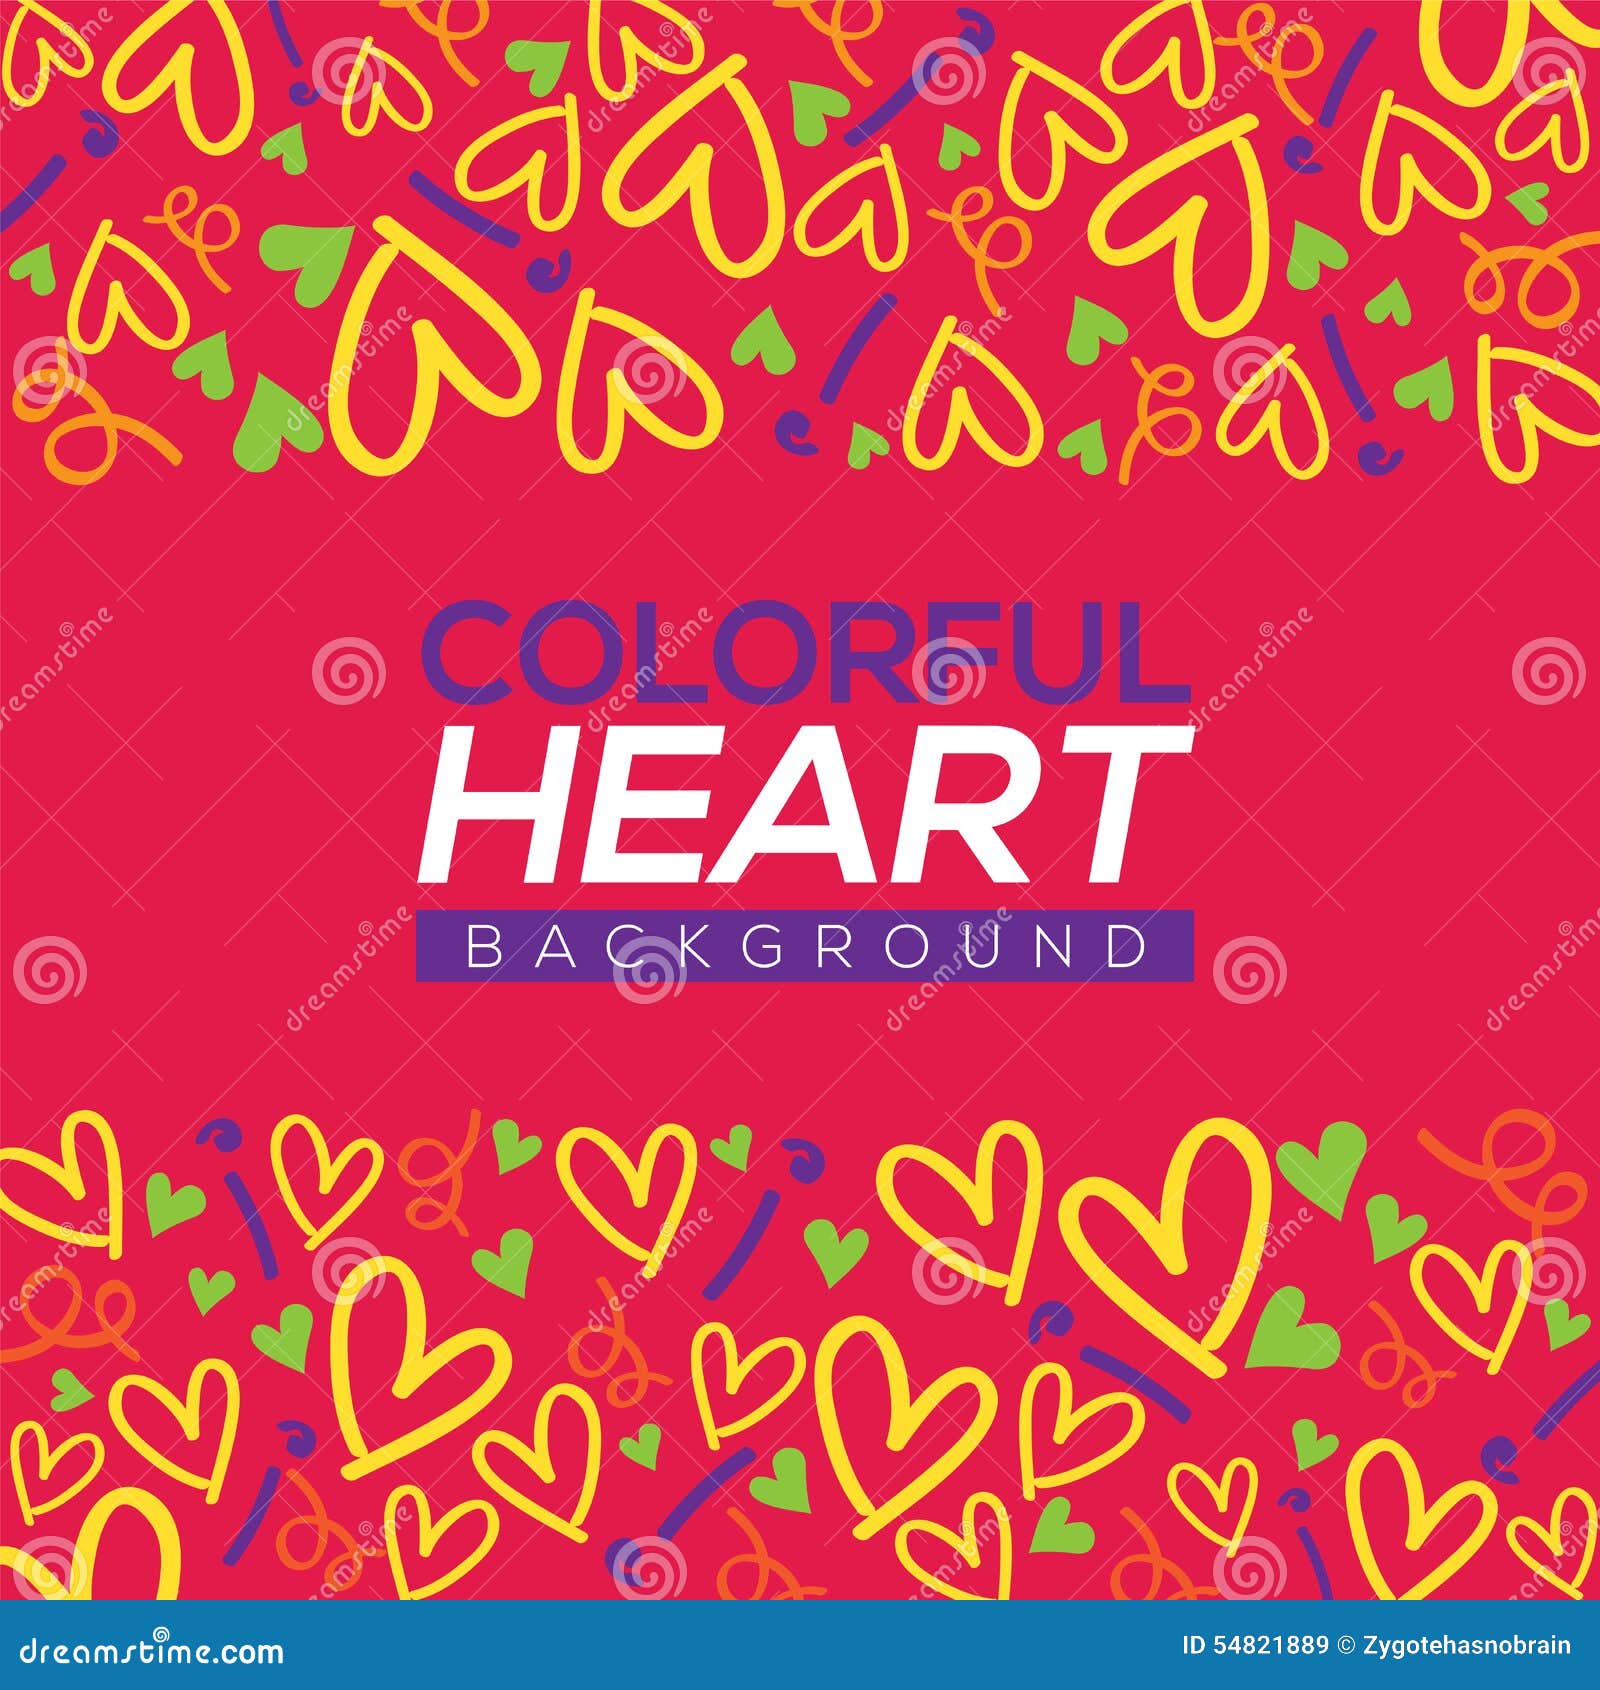 Colorful Hearts Background Vector Illustration